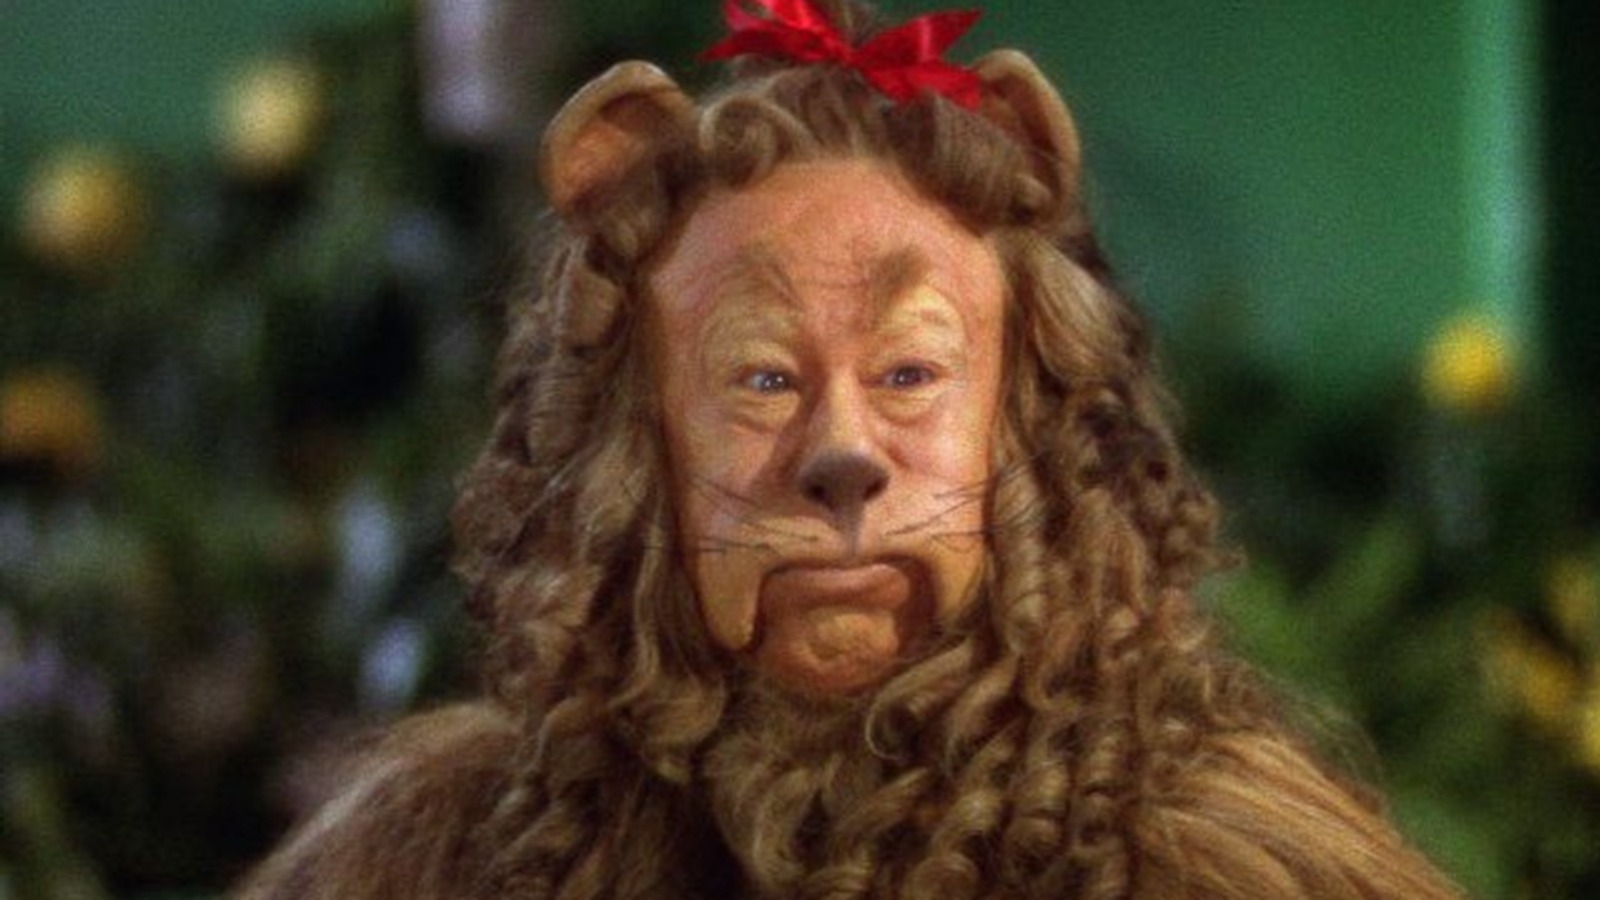 Why The Cowardly Lion Costume From The Wizard Of Oz Was So Disgusting